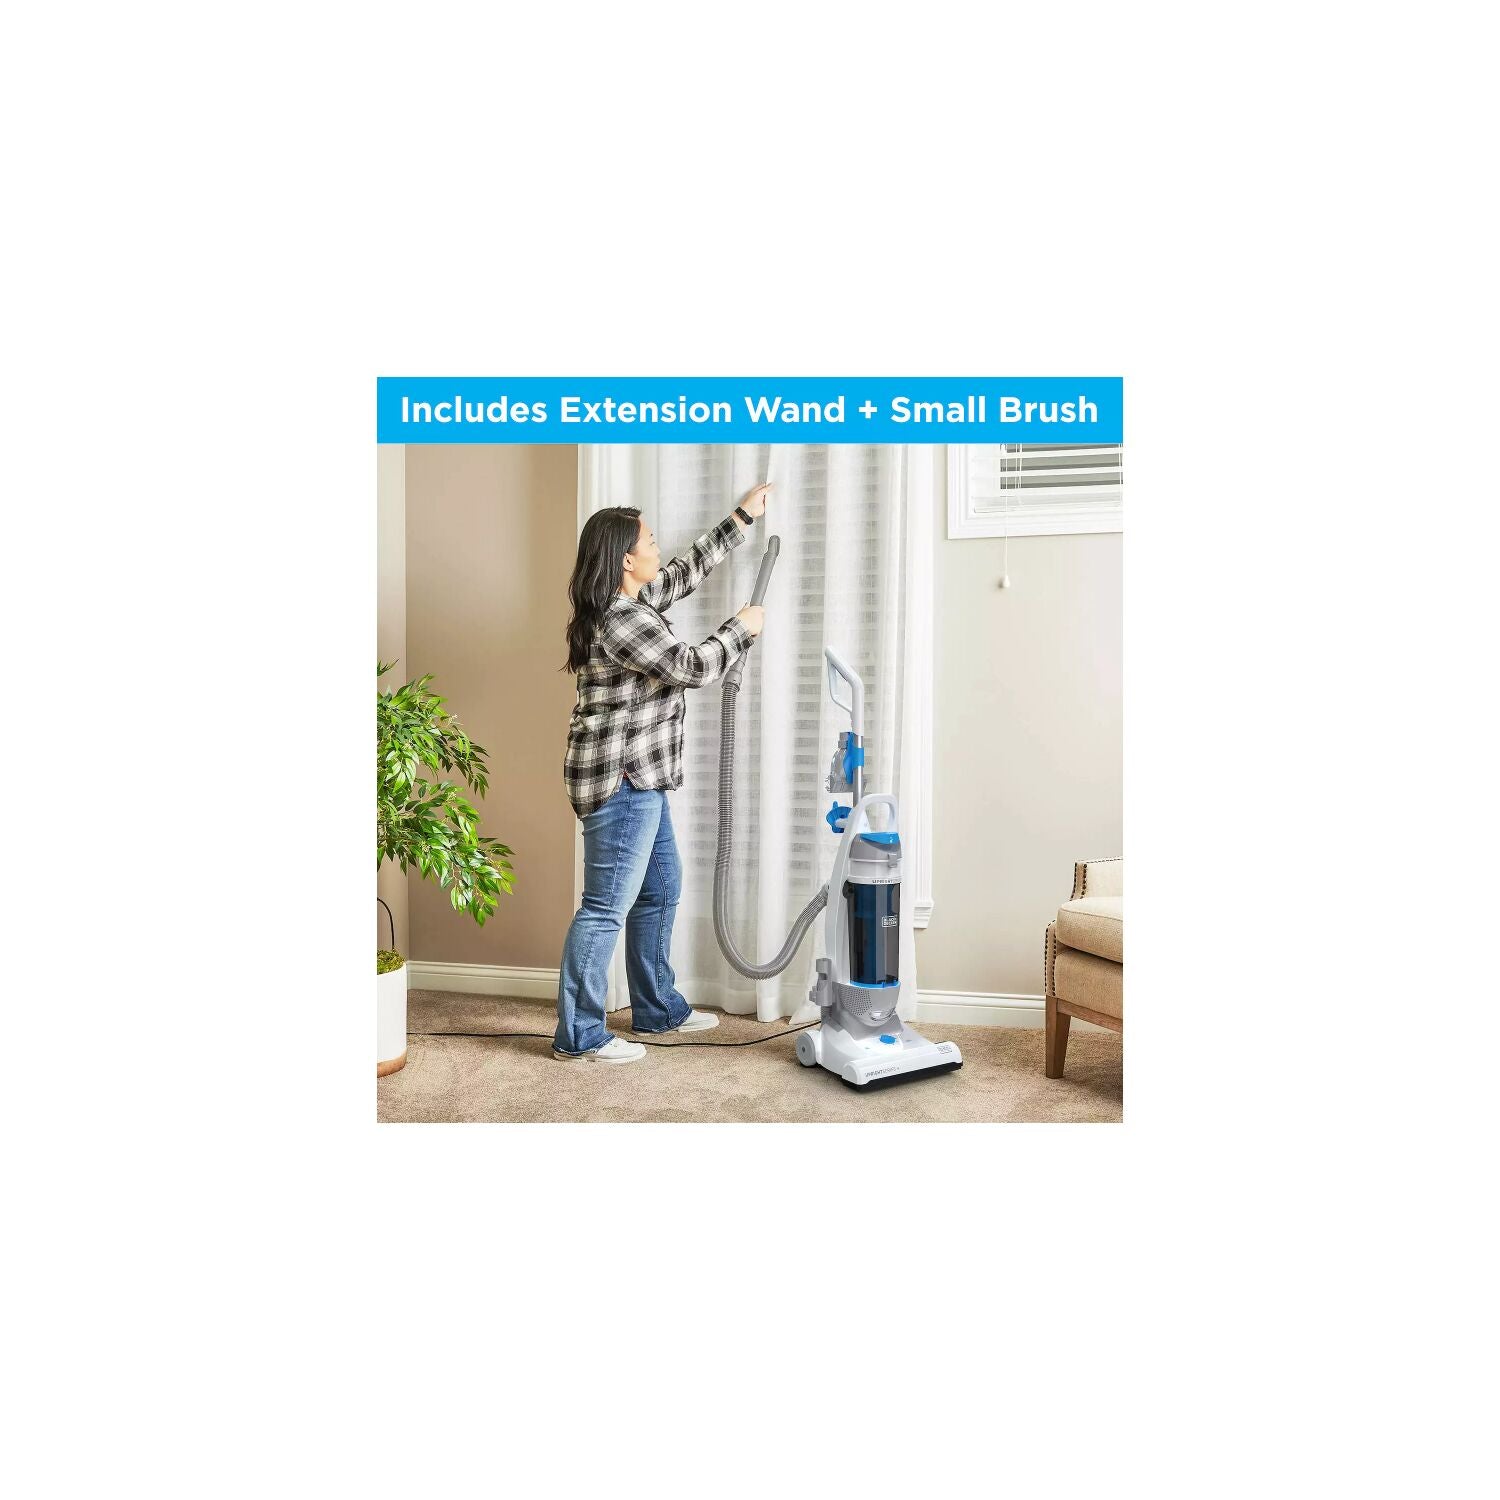 BLACK+DECKER™ UprightSeries Multi-Surface Upright Vacuum with HEPA  Filtration (BDUR1-BLK)